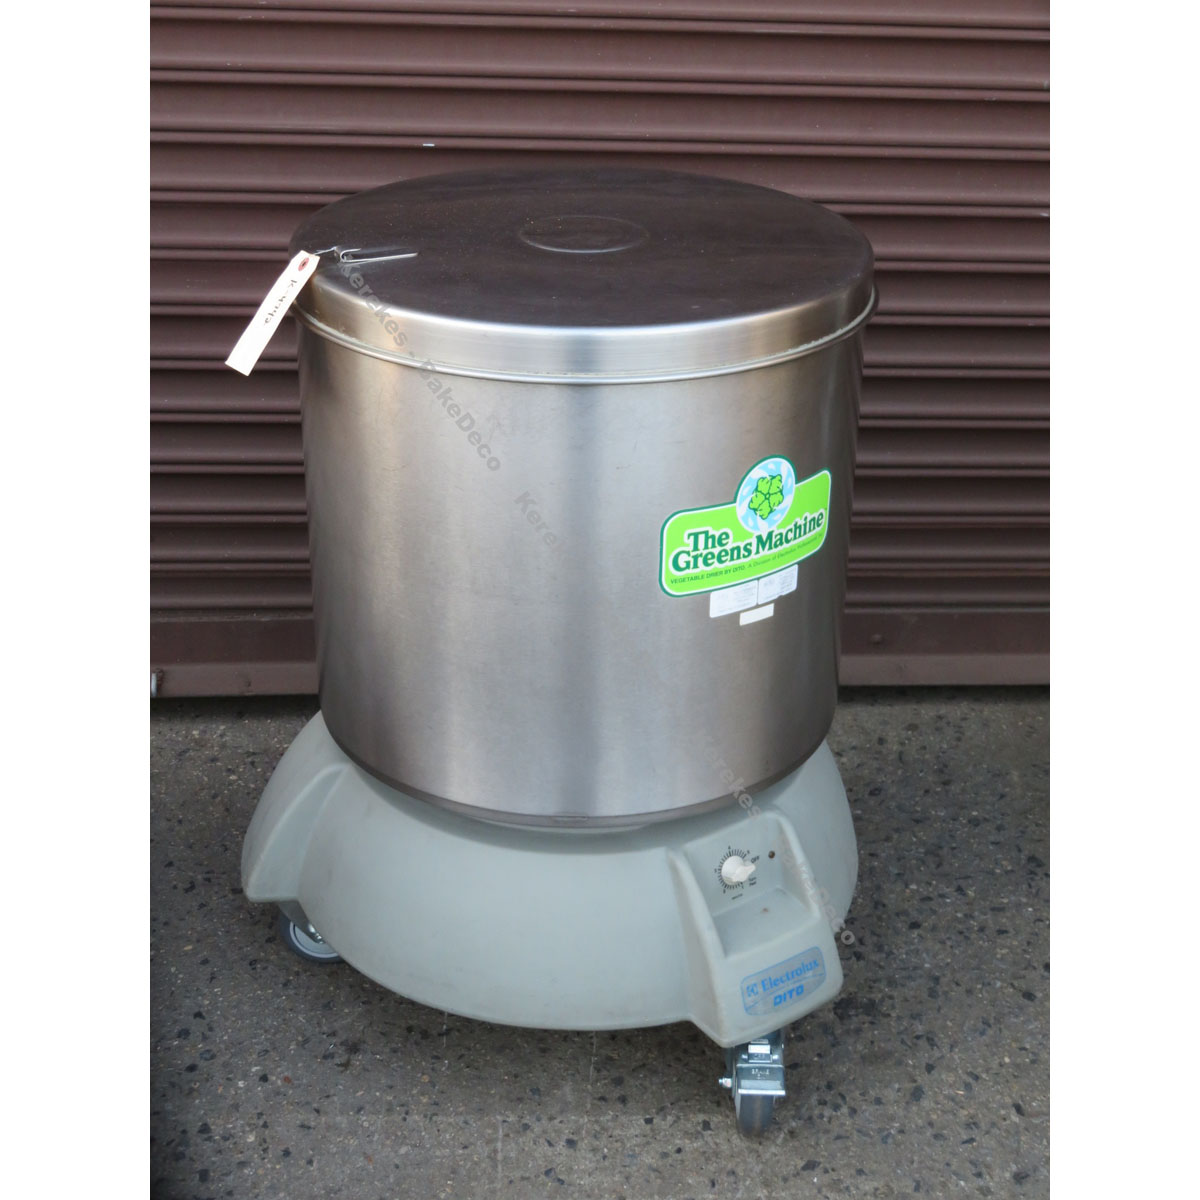 Electrolux VP1 20 Gallon Salad Spinner Dryer, Used Excellent Condition